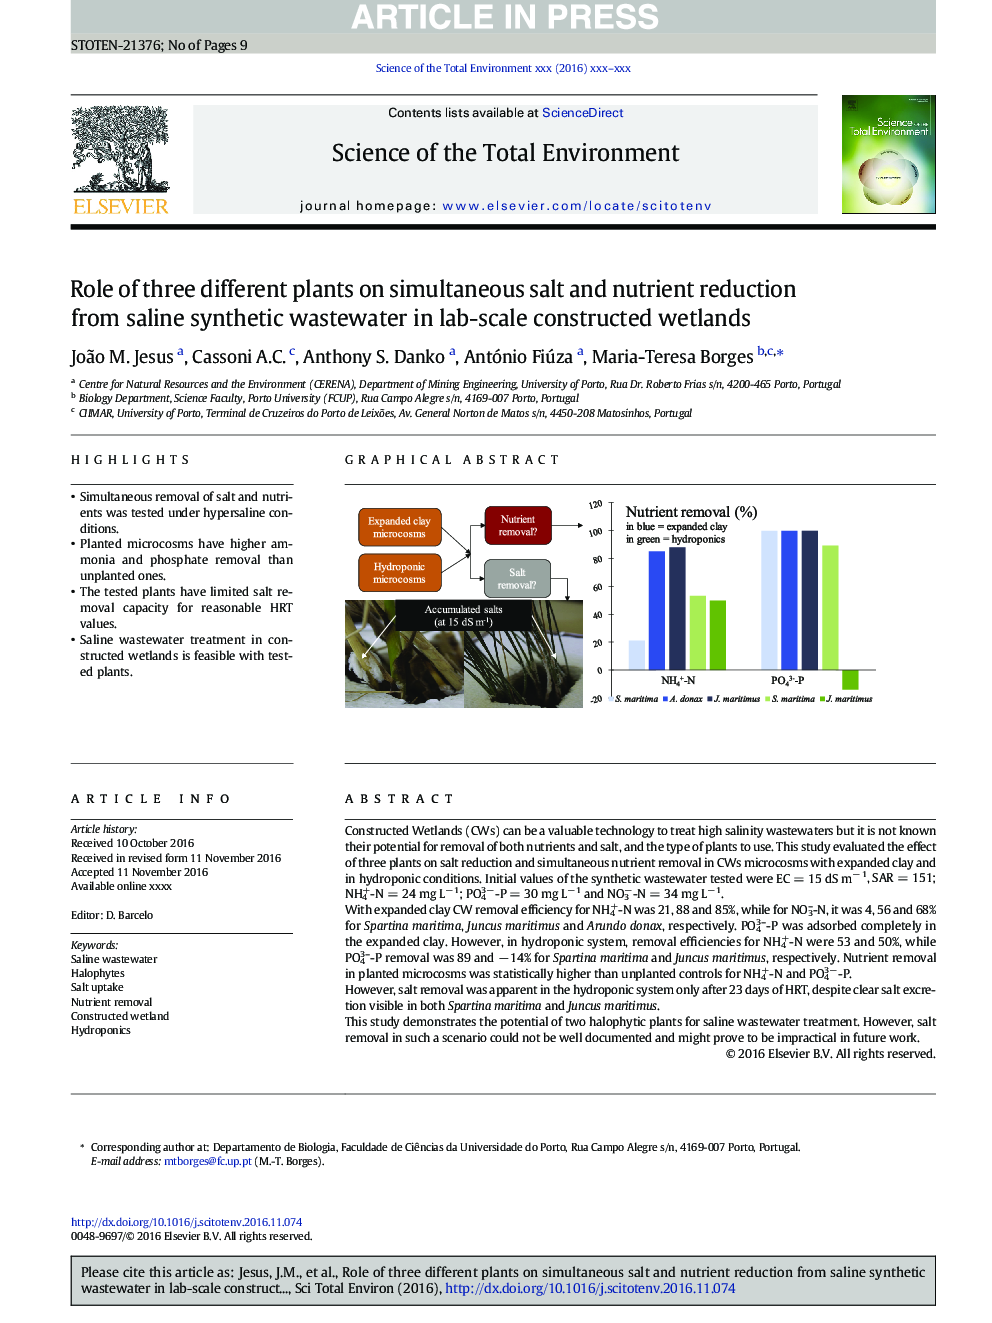 Role of three different plants on simultaneous salt and nutrient reduction from saline synthetic wastewater in lab-scale constructed wetlands